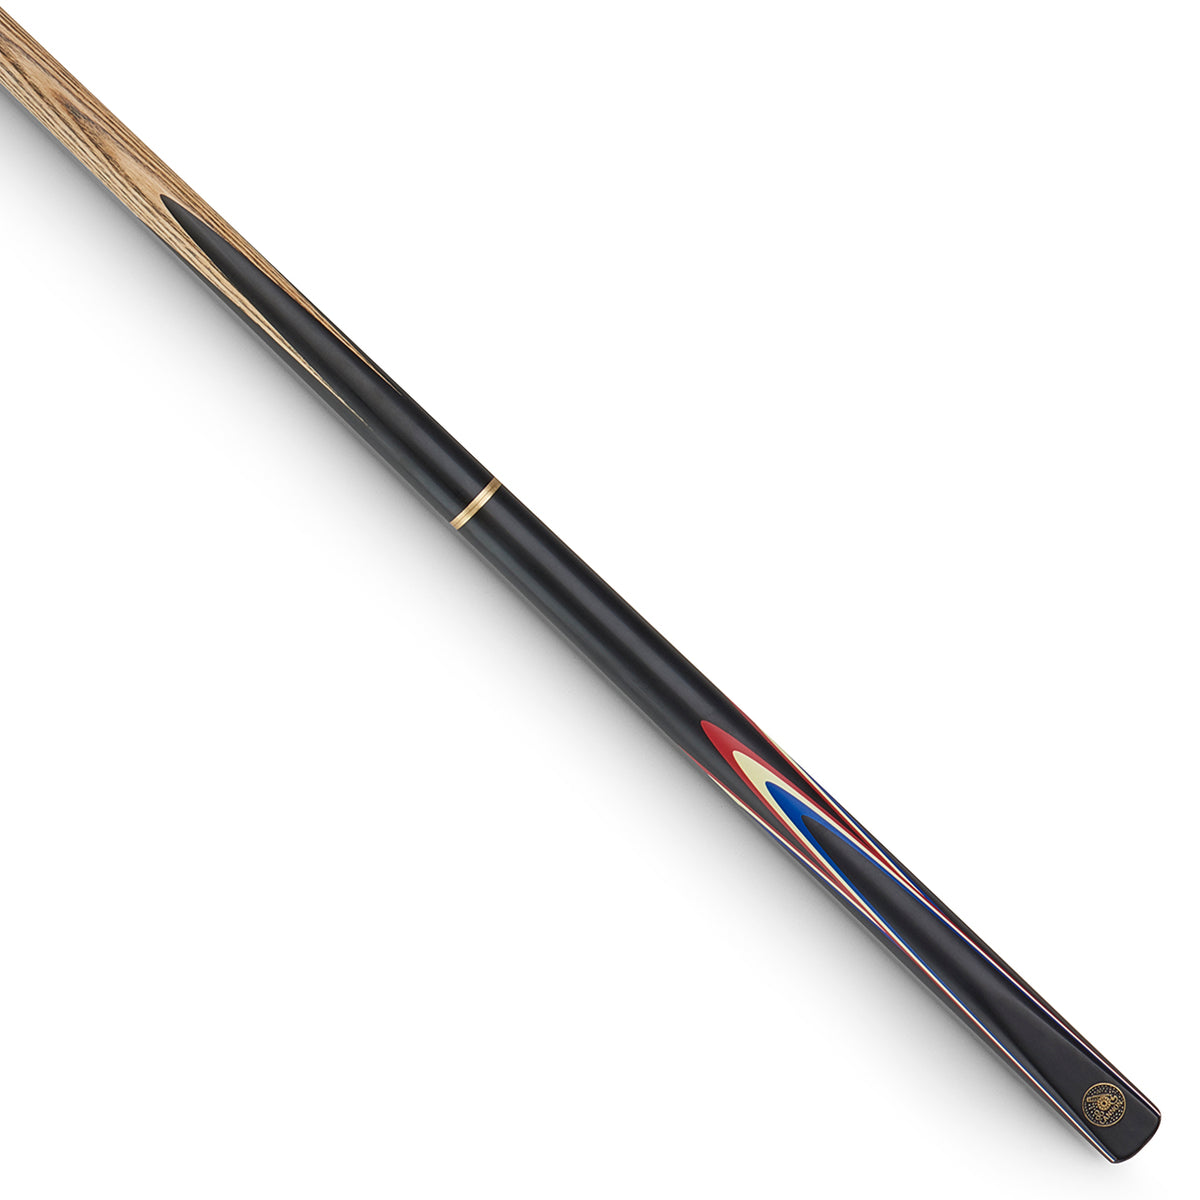 Cannon Sabre 3/4 Jointed Snooker Cue. On angle view